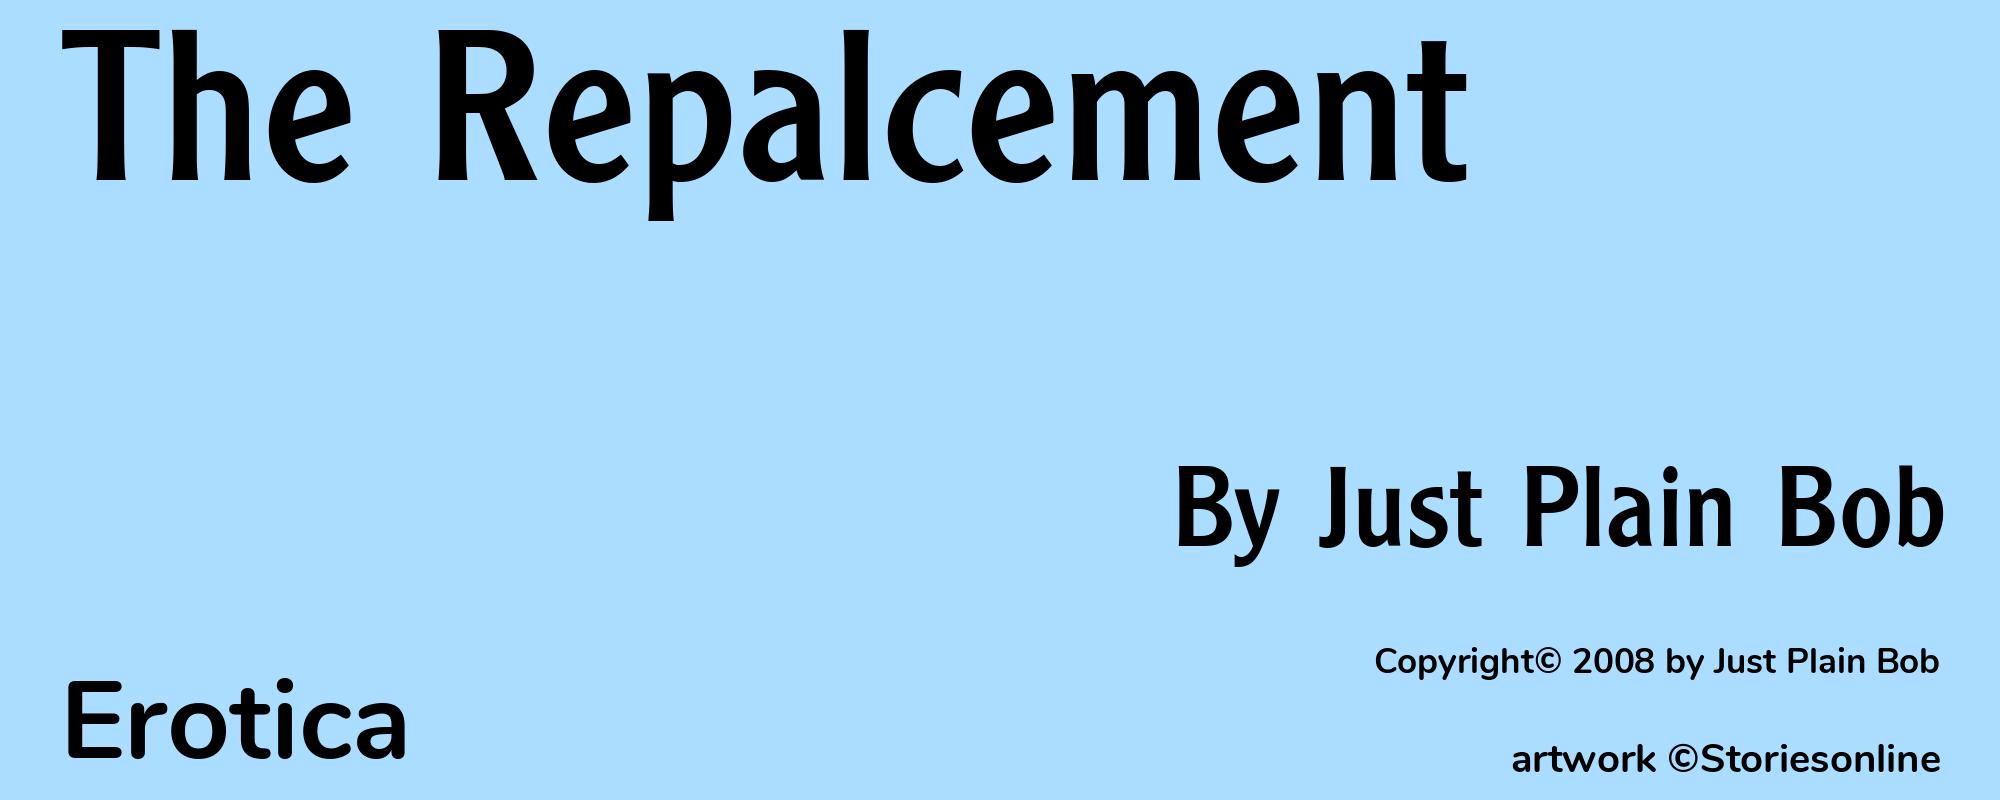 The Repalcement - Cover